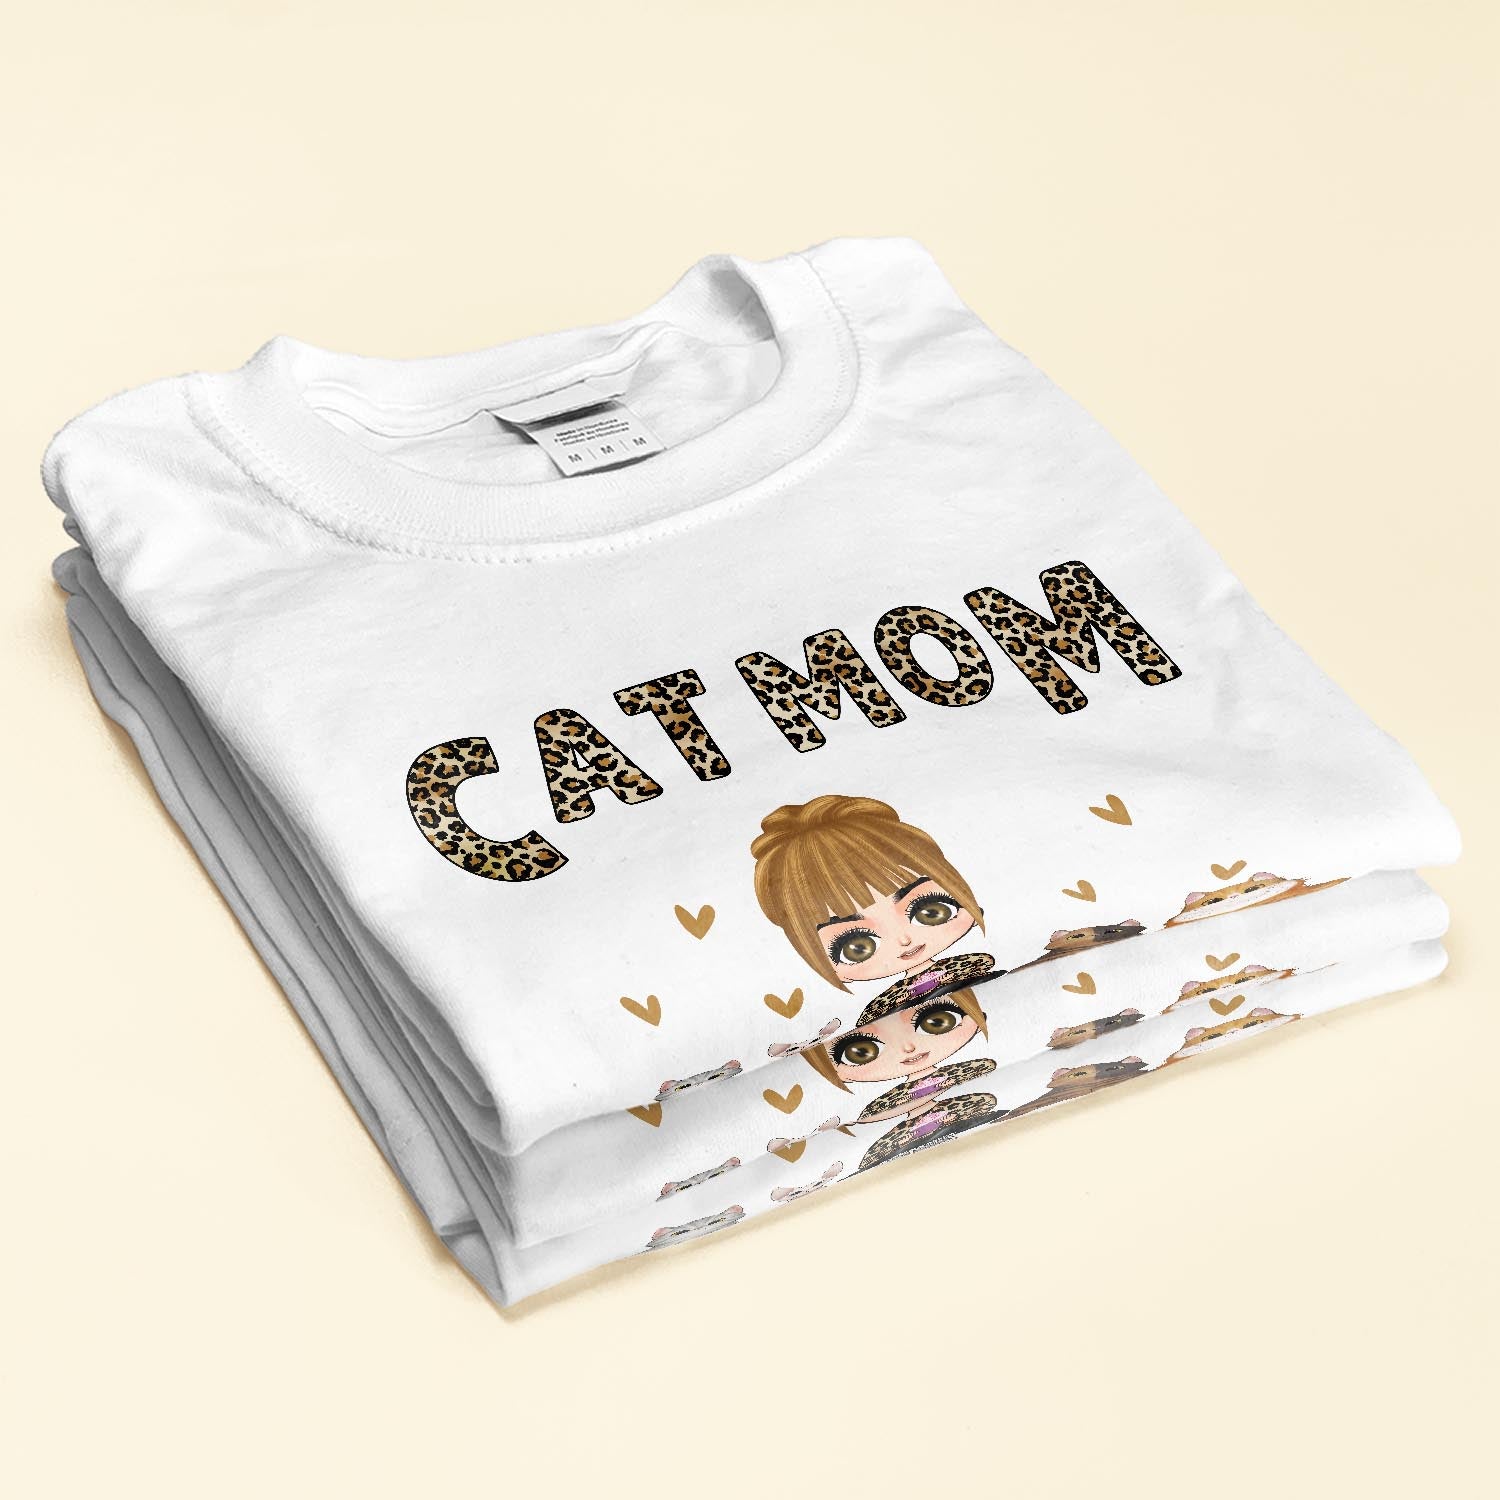 Cat Mom Leopard Design - Personalized Shirt - Birthday Gift For Cat Mom, Cat Lovers